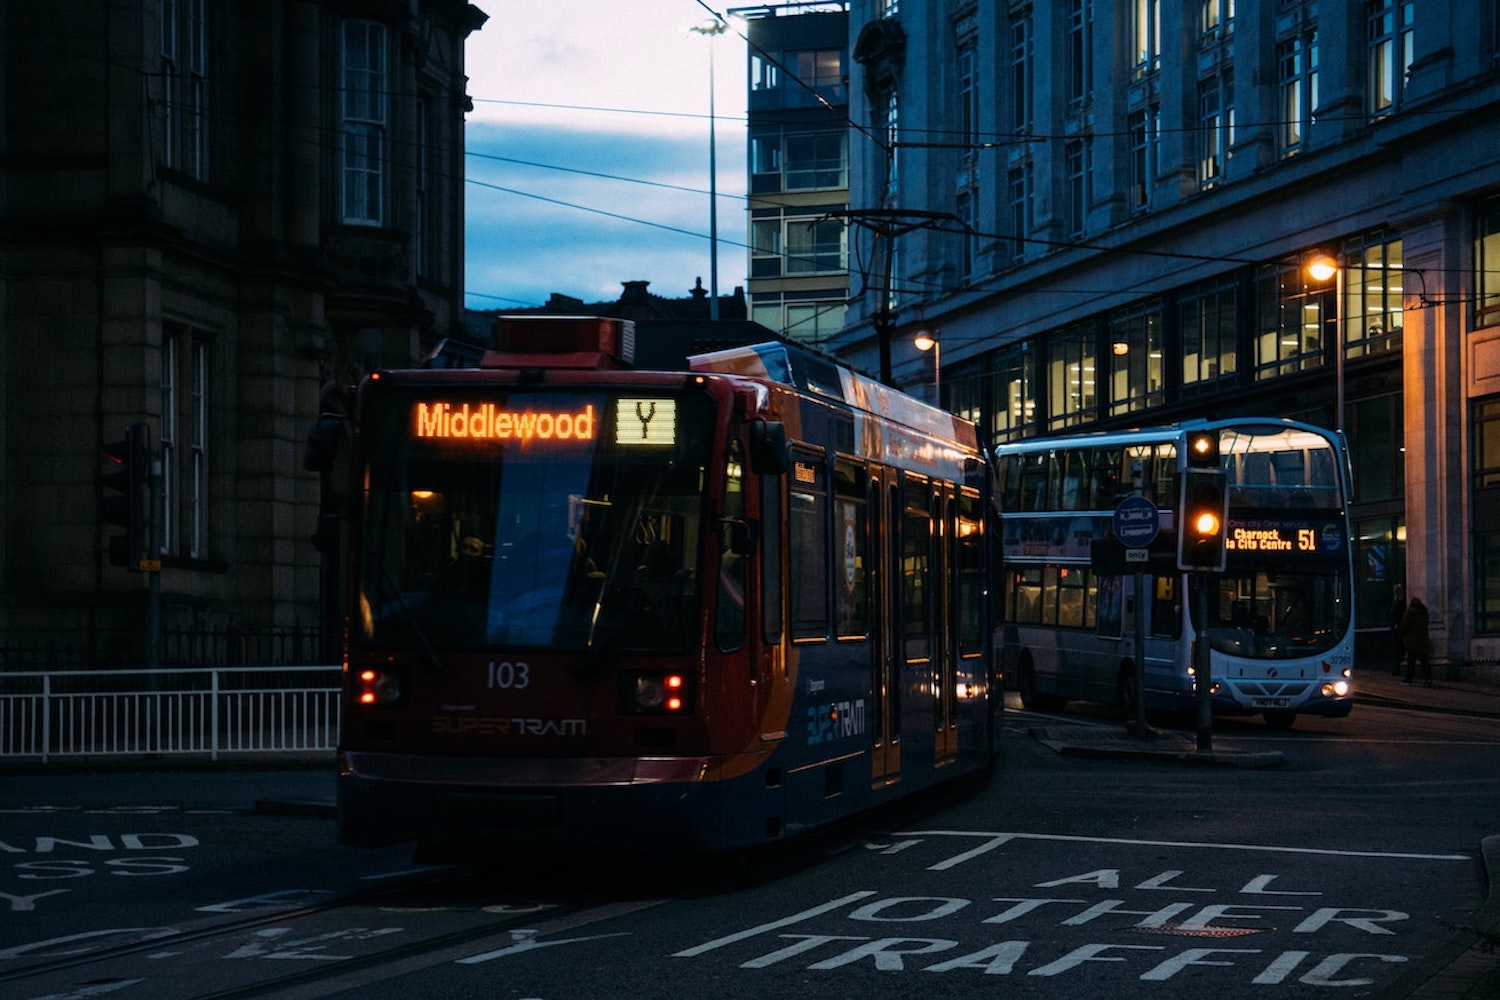 A bus and a tram in a city centre